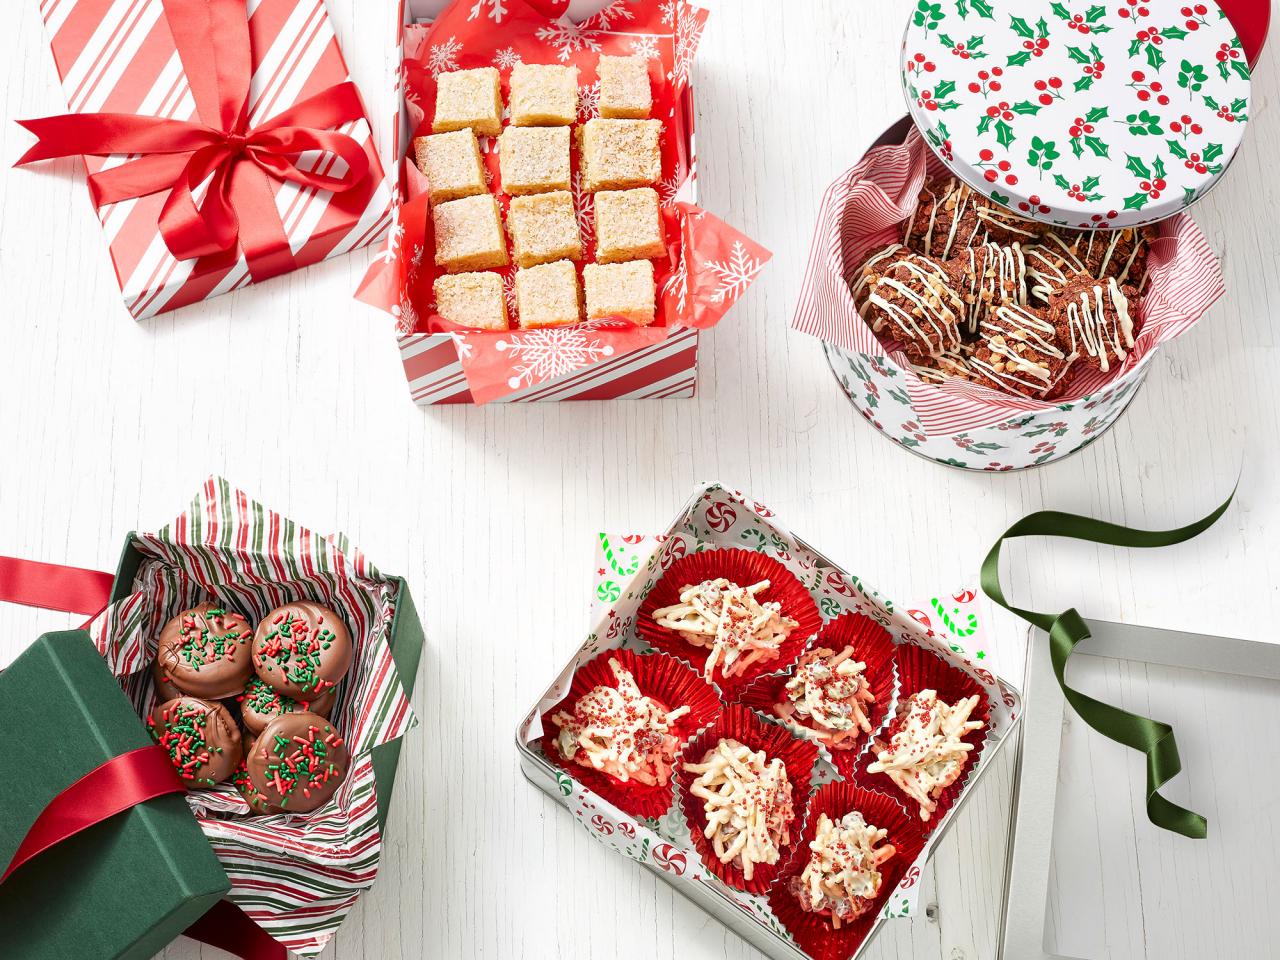 Food Network Stars Share Their AllTime Favorite NoBake Holiday Cookie